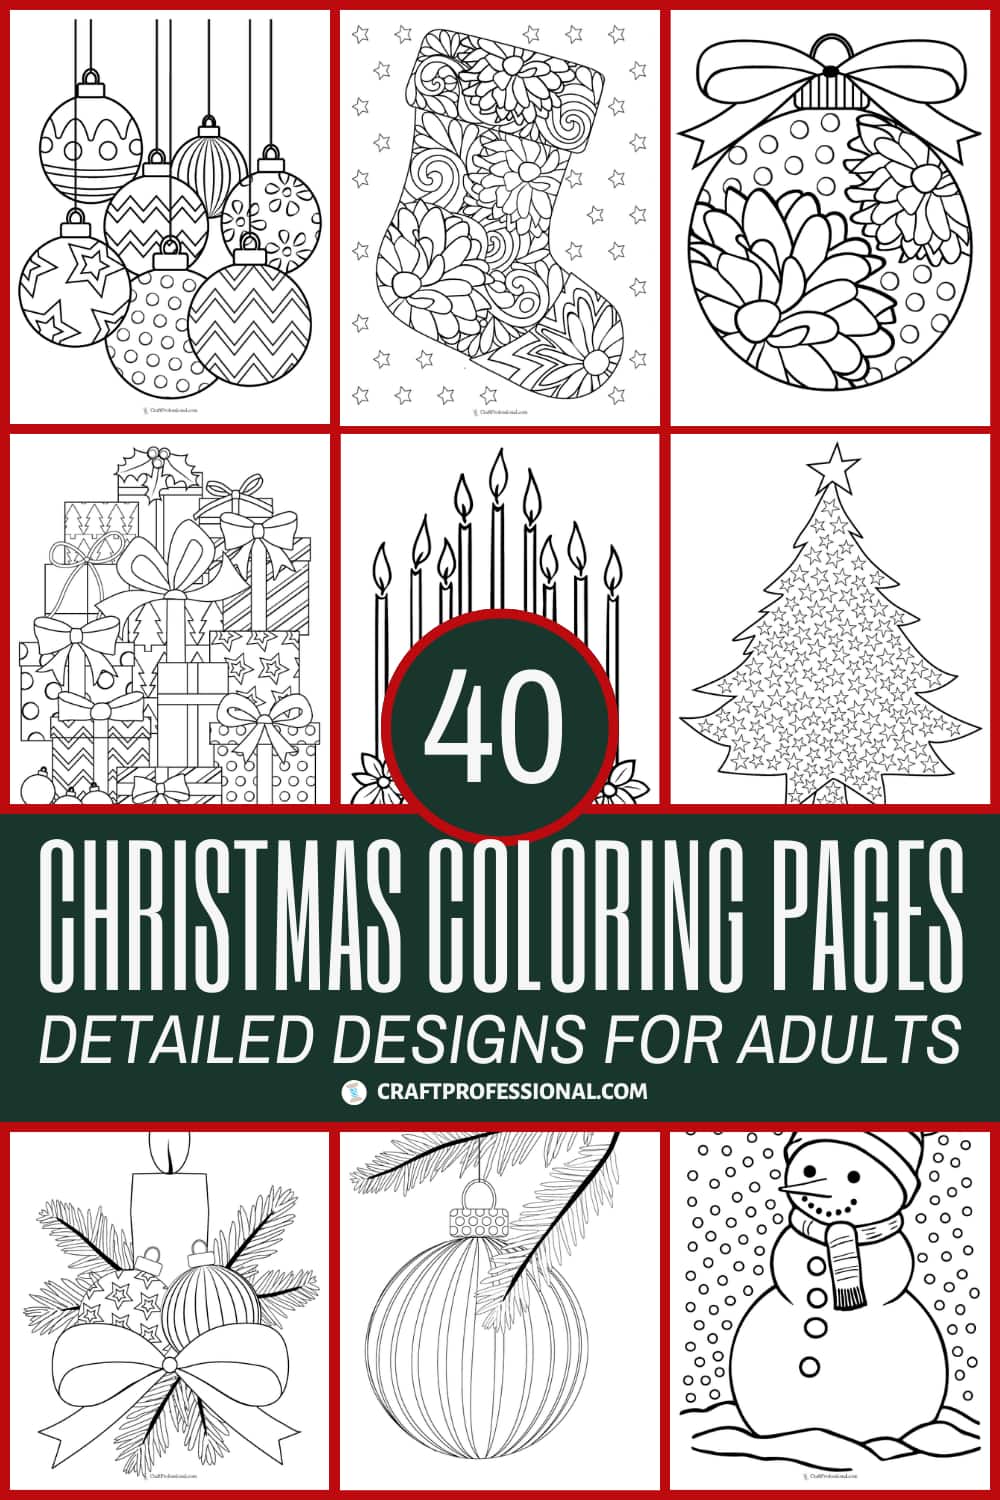 Colorful and Challenging Color by Number Pages for Relaxation and Creativity